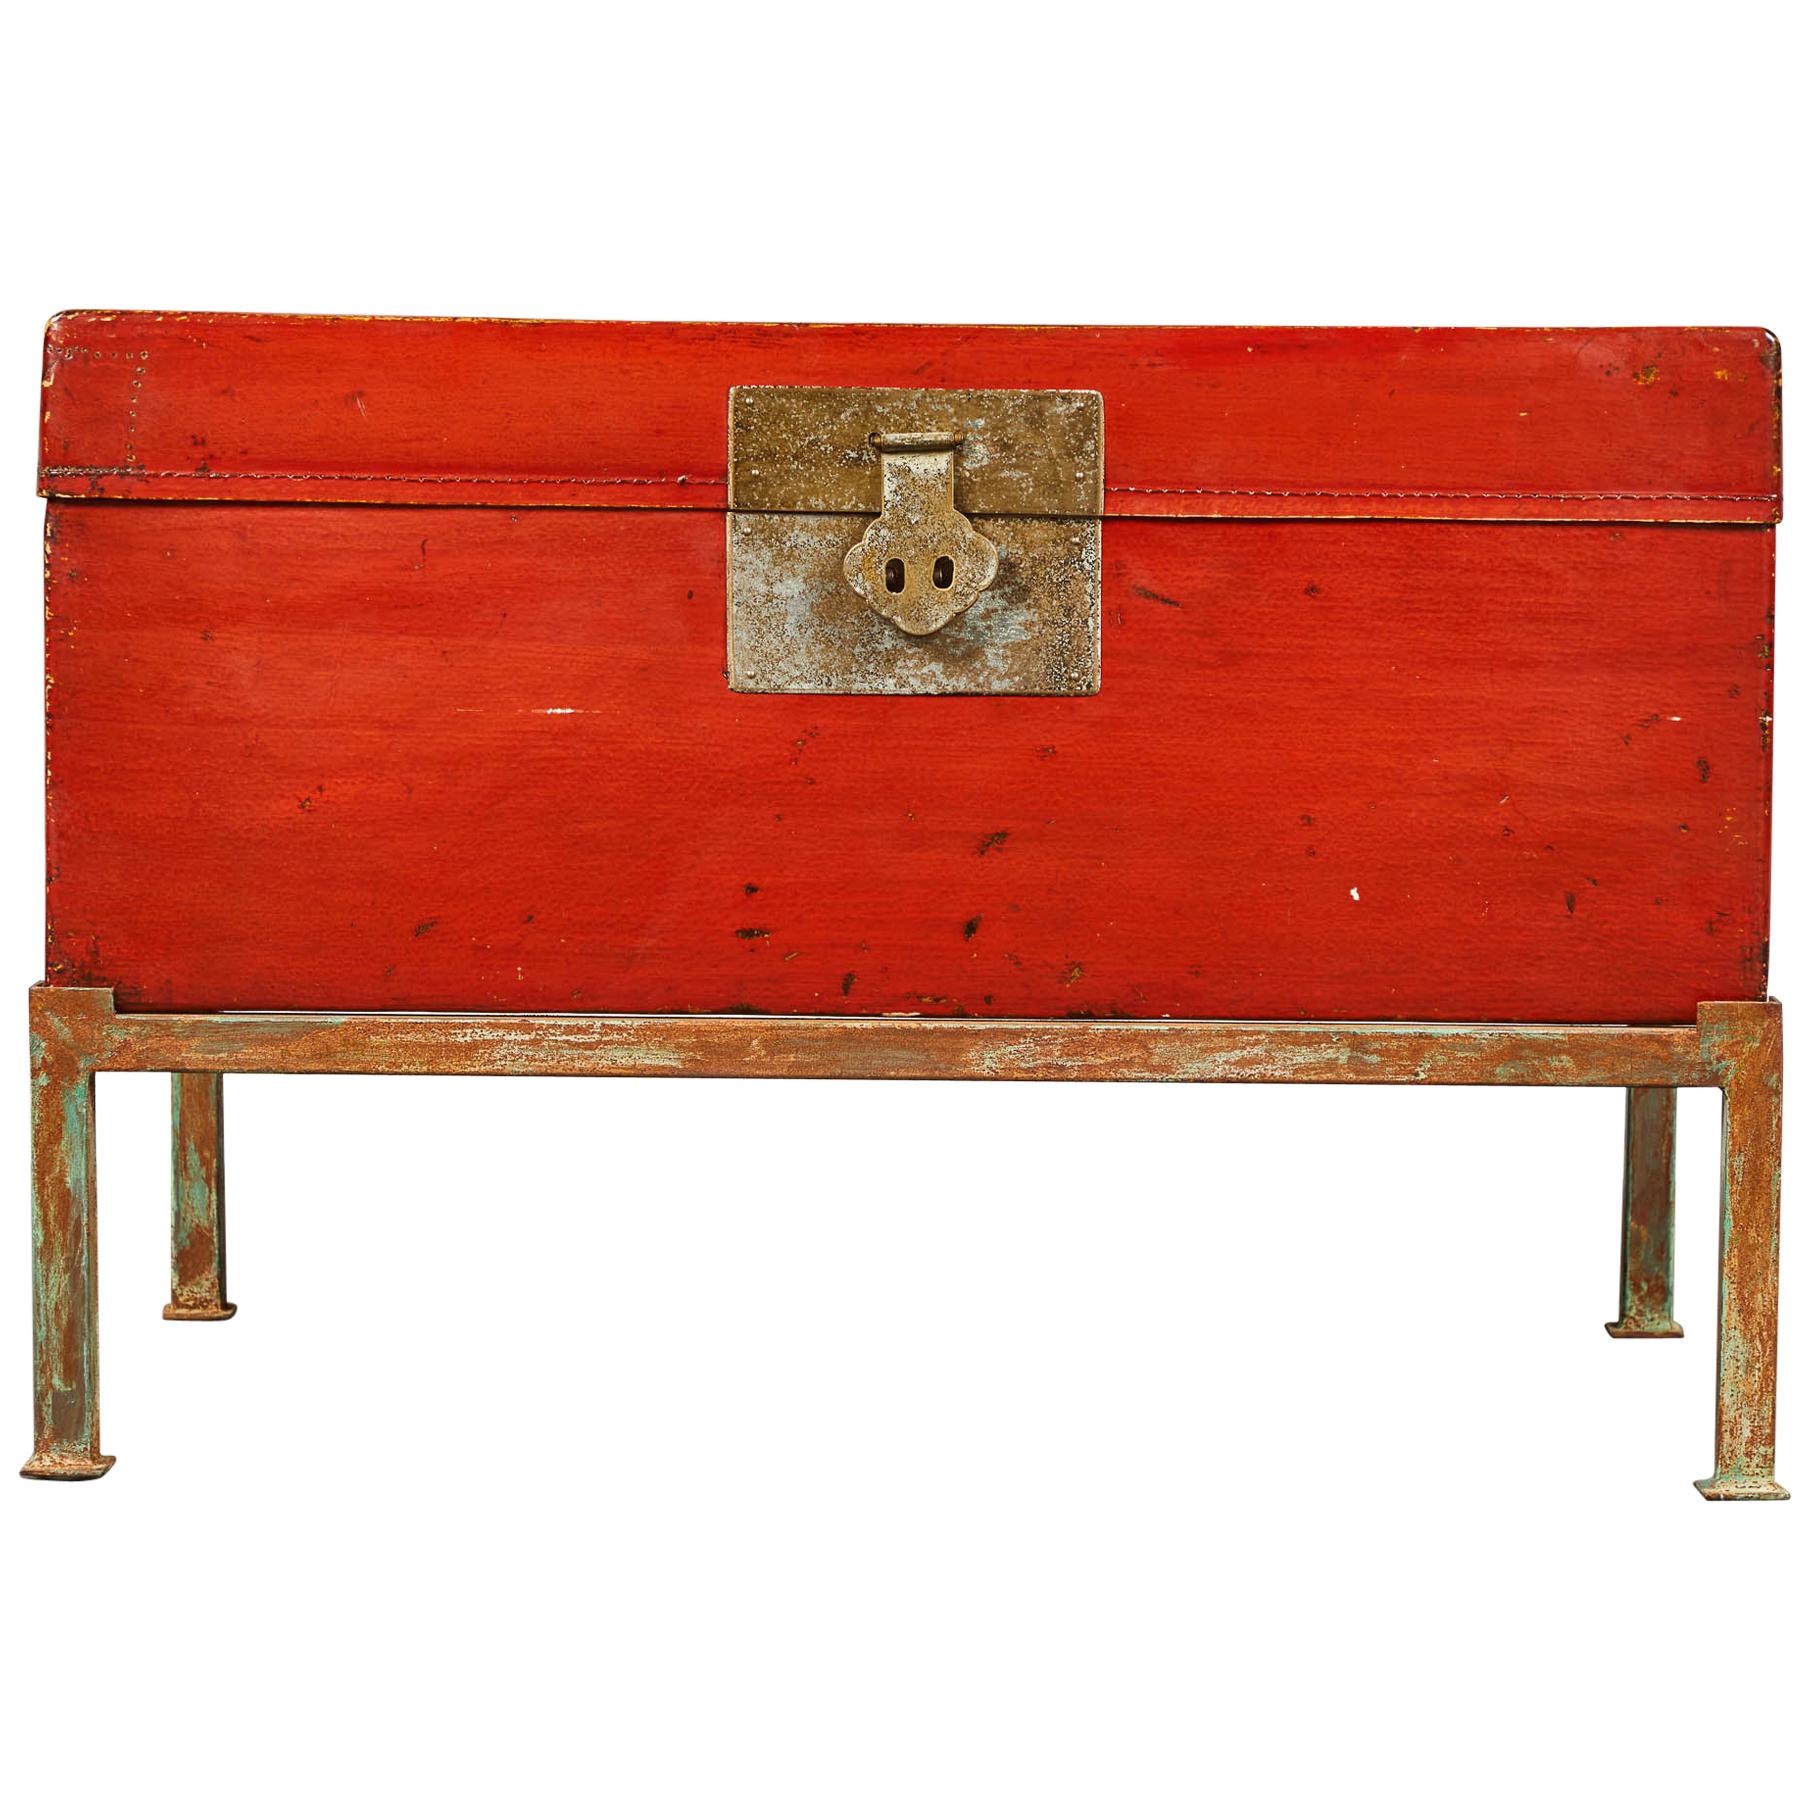 Red Lacquer Pig-Skin Leather Camphor Trunk on Stand